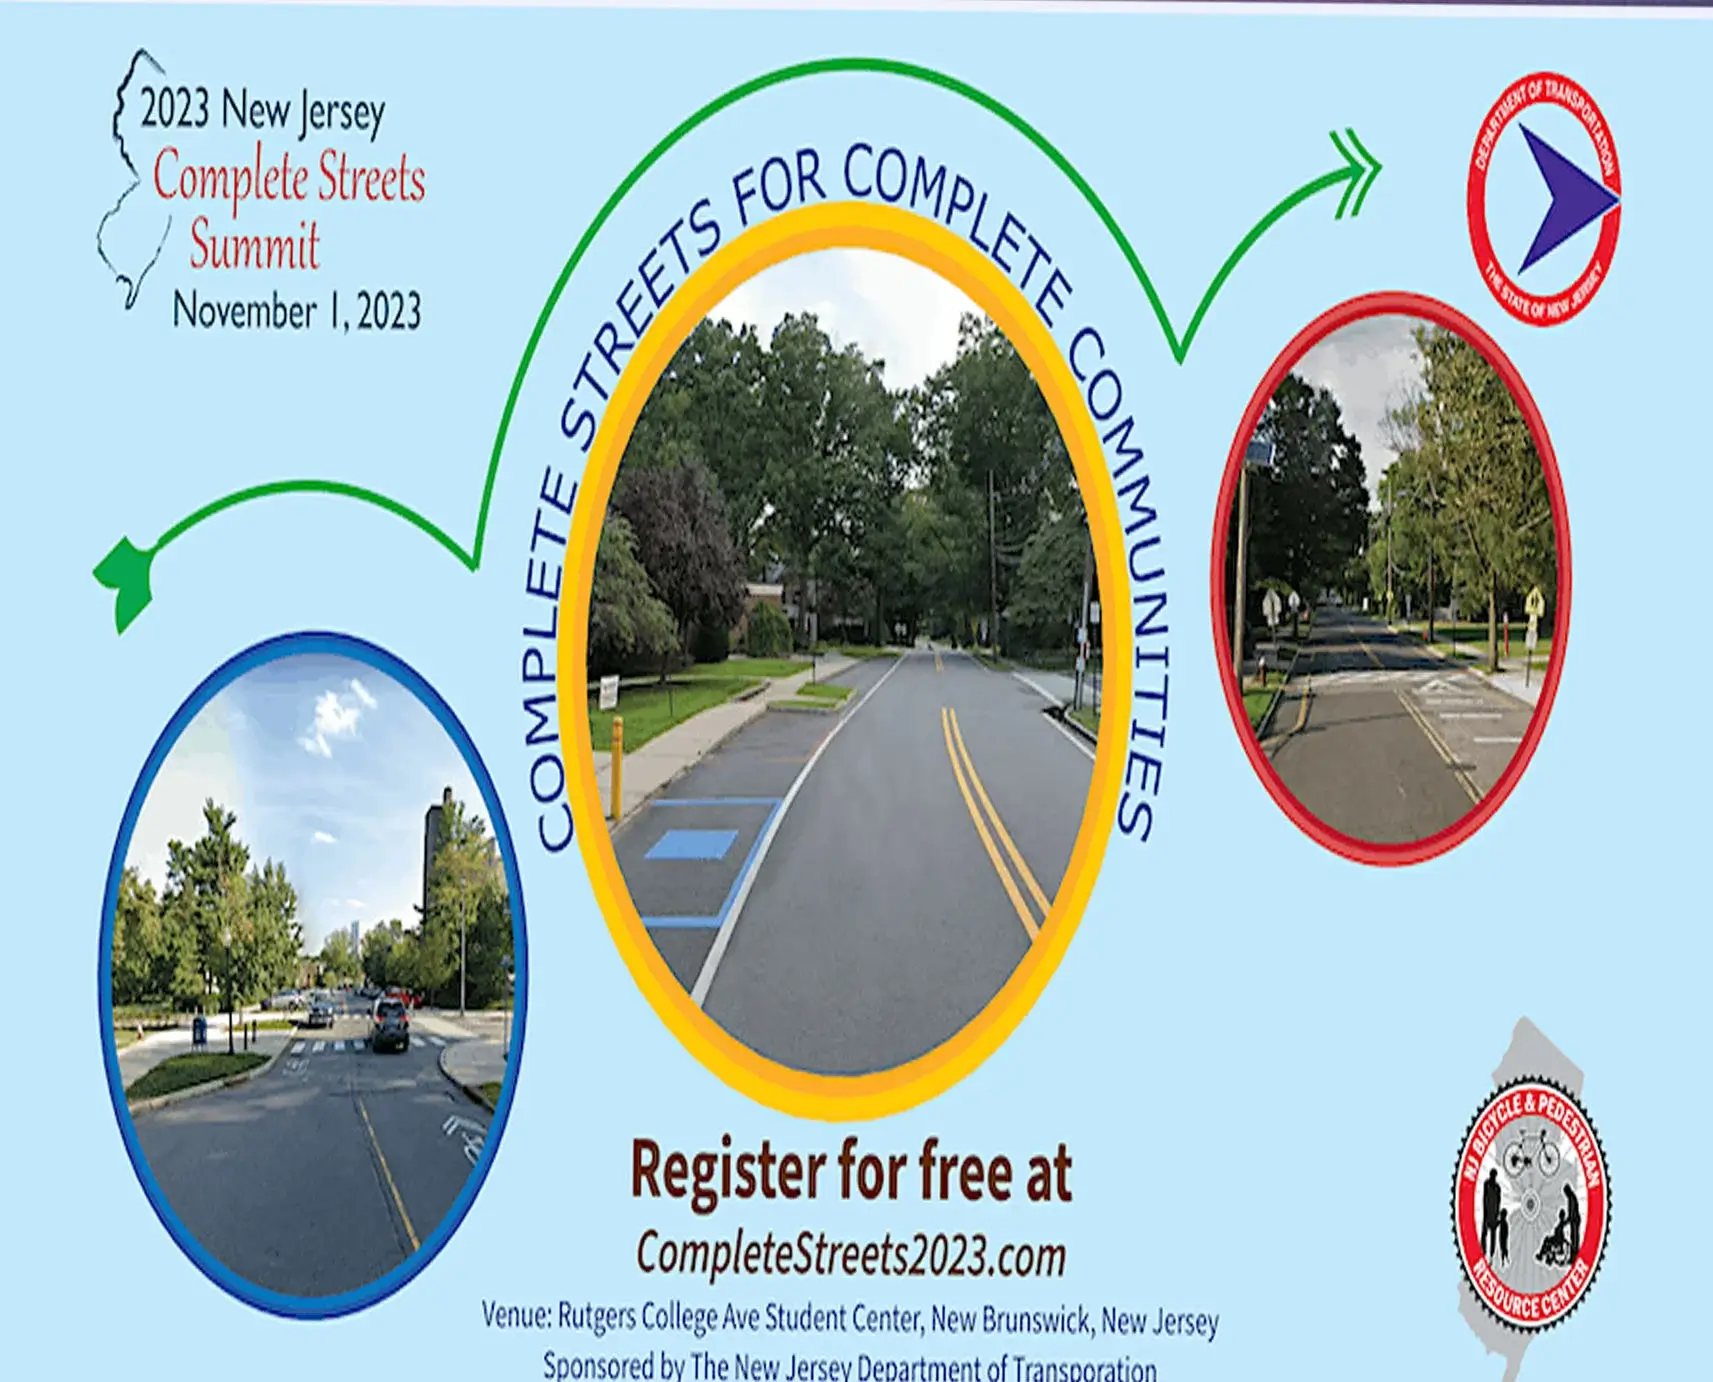 2023 New Jersey Complete Streets Summit